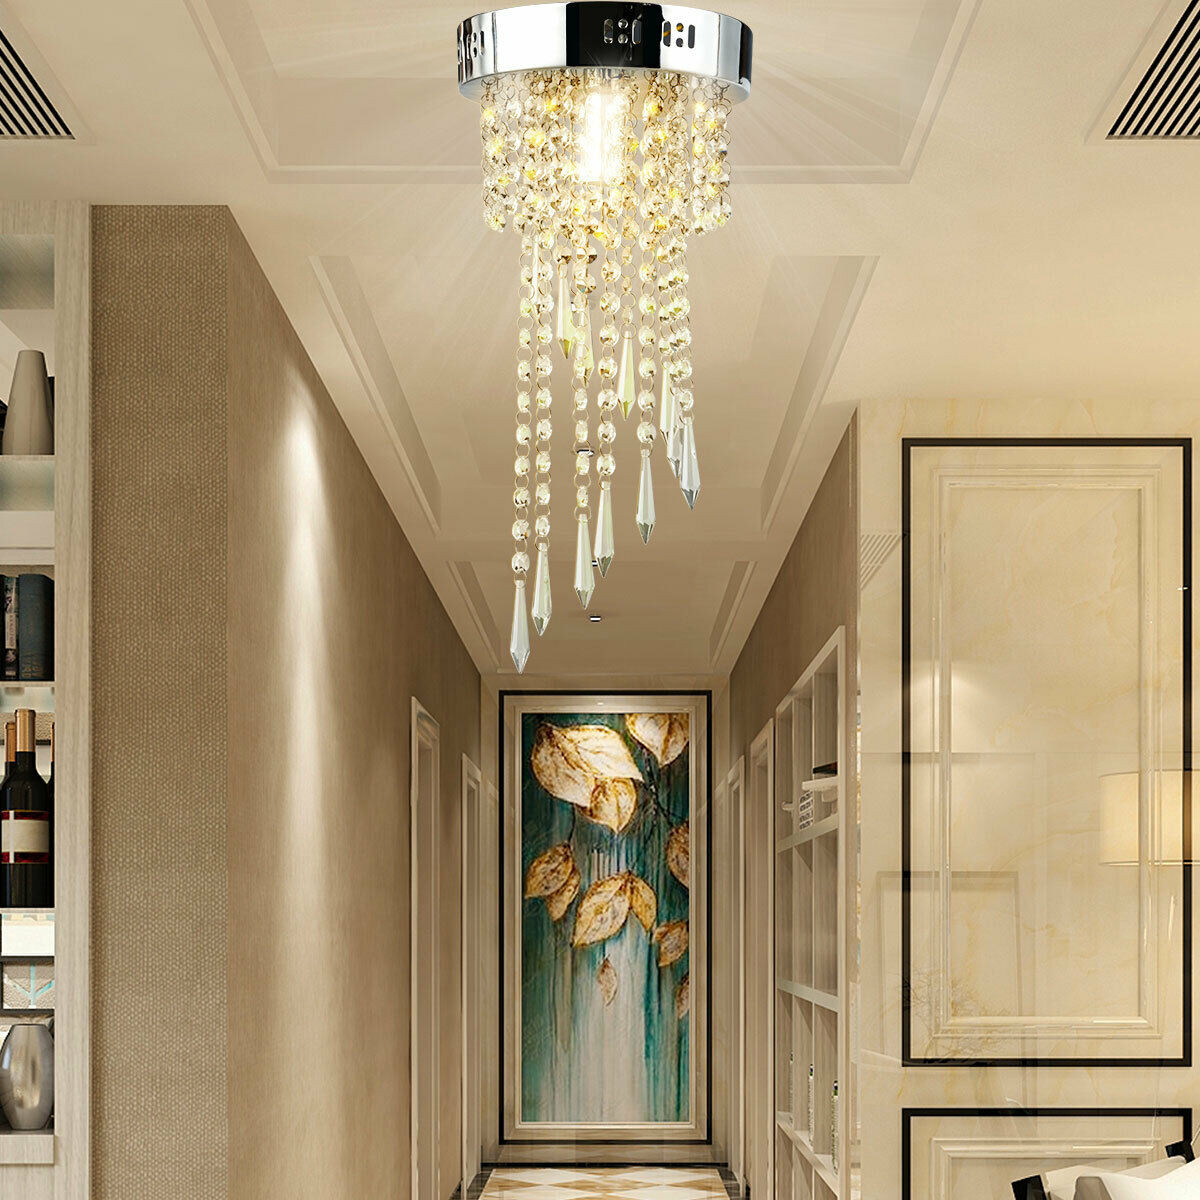 Elegant Ceiling Crystal Chandeliers With Stainless Base